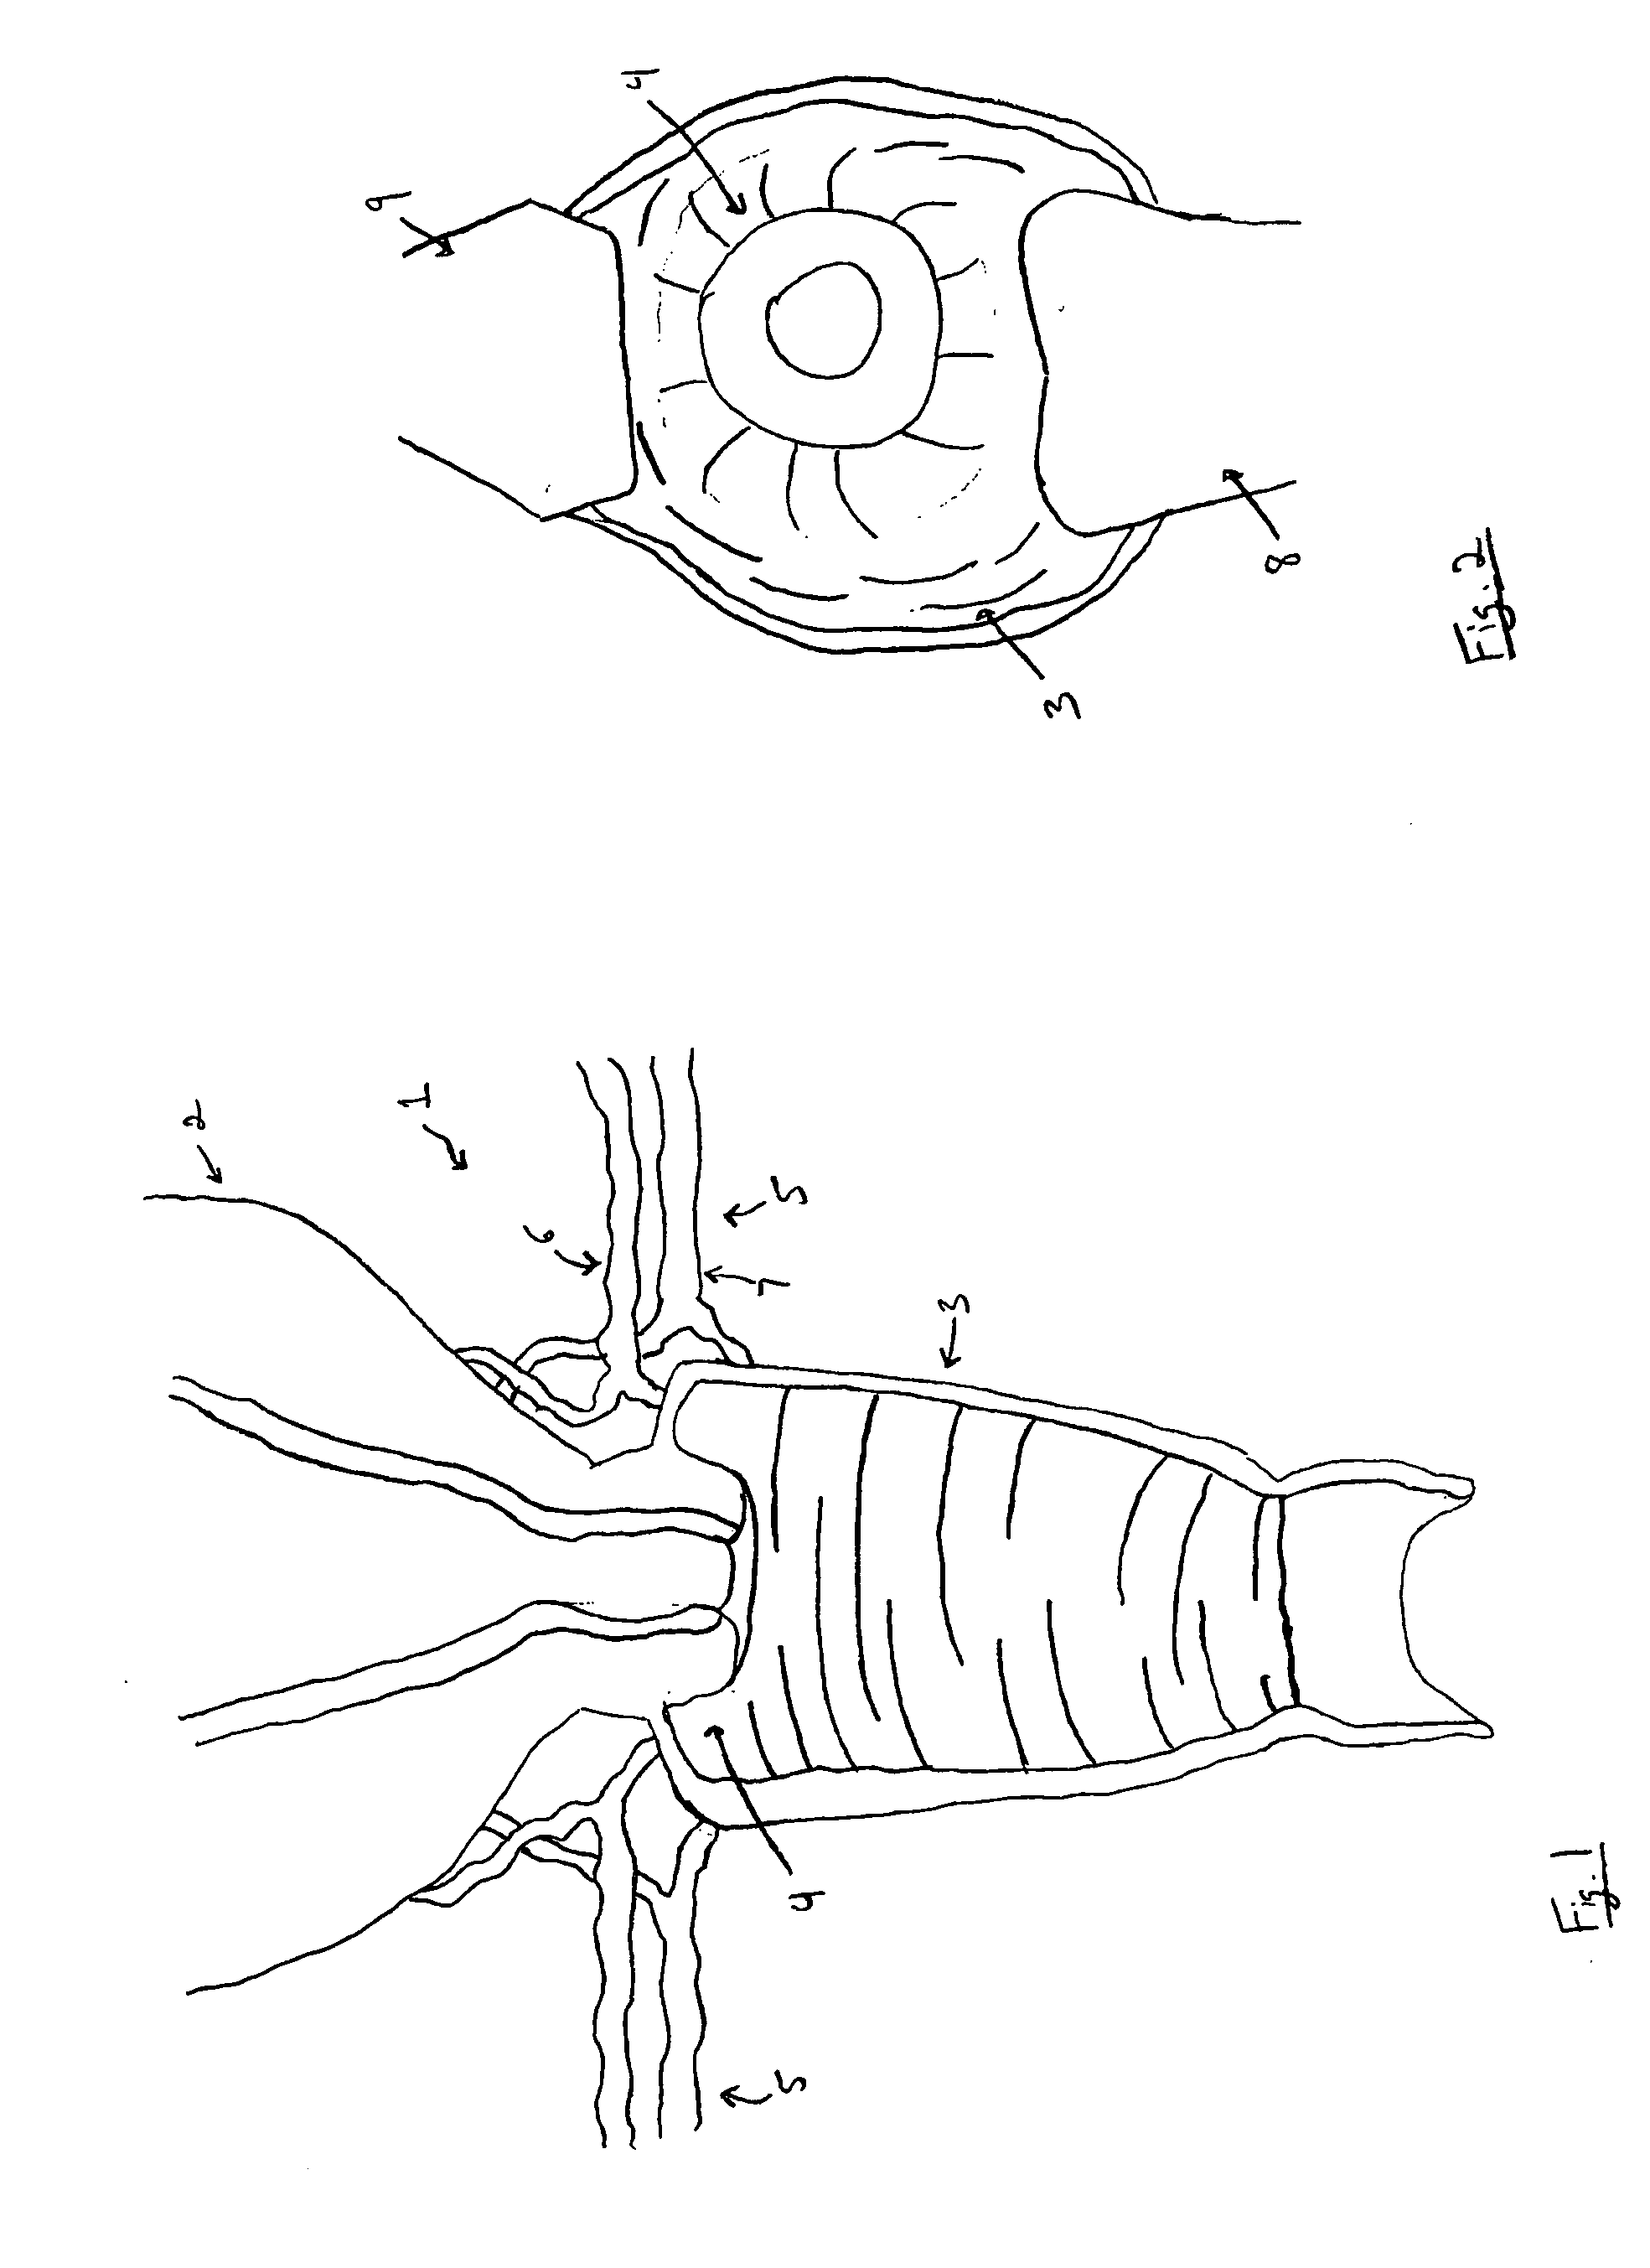 Method and device for canulation and occlusion of uterine arteries